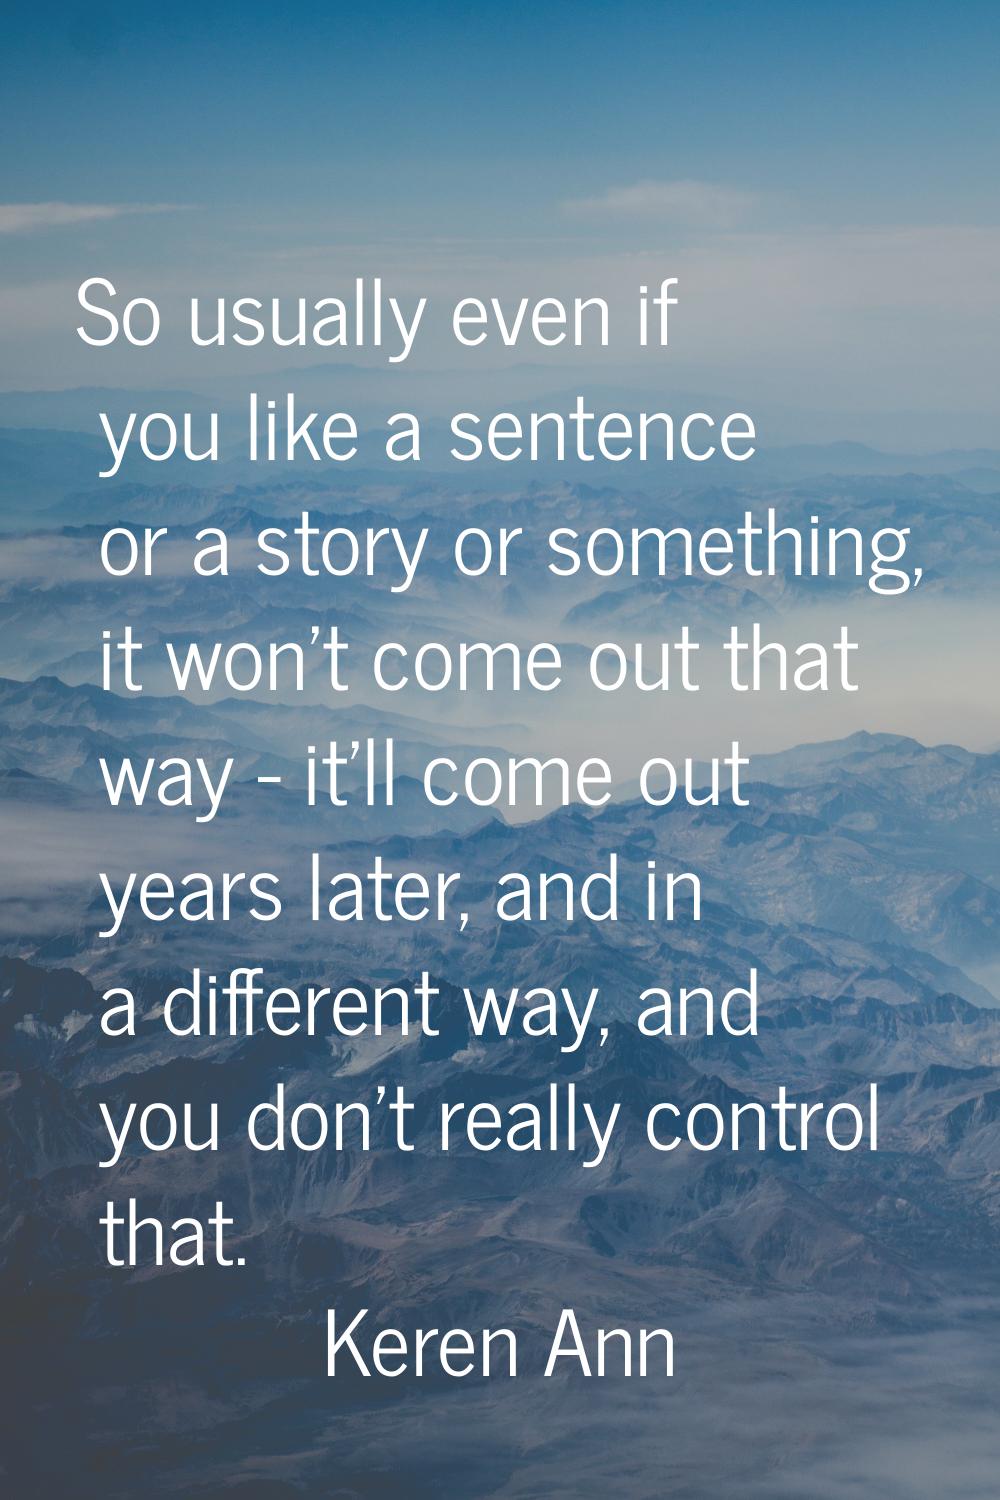 So usually even if you like a sentence or a story or something, it won't come out that way - it'll 